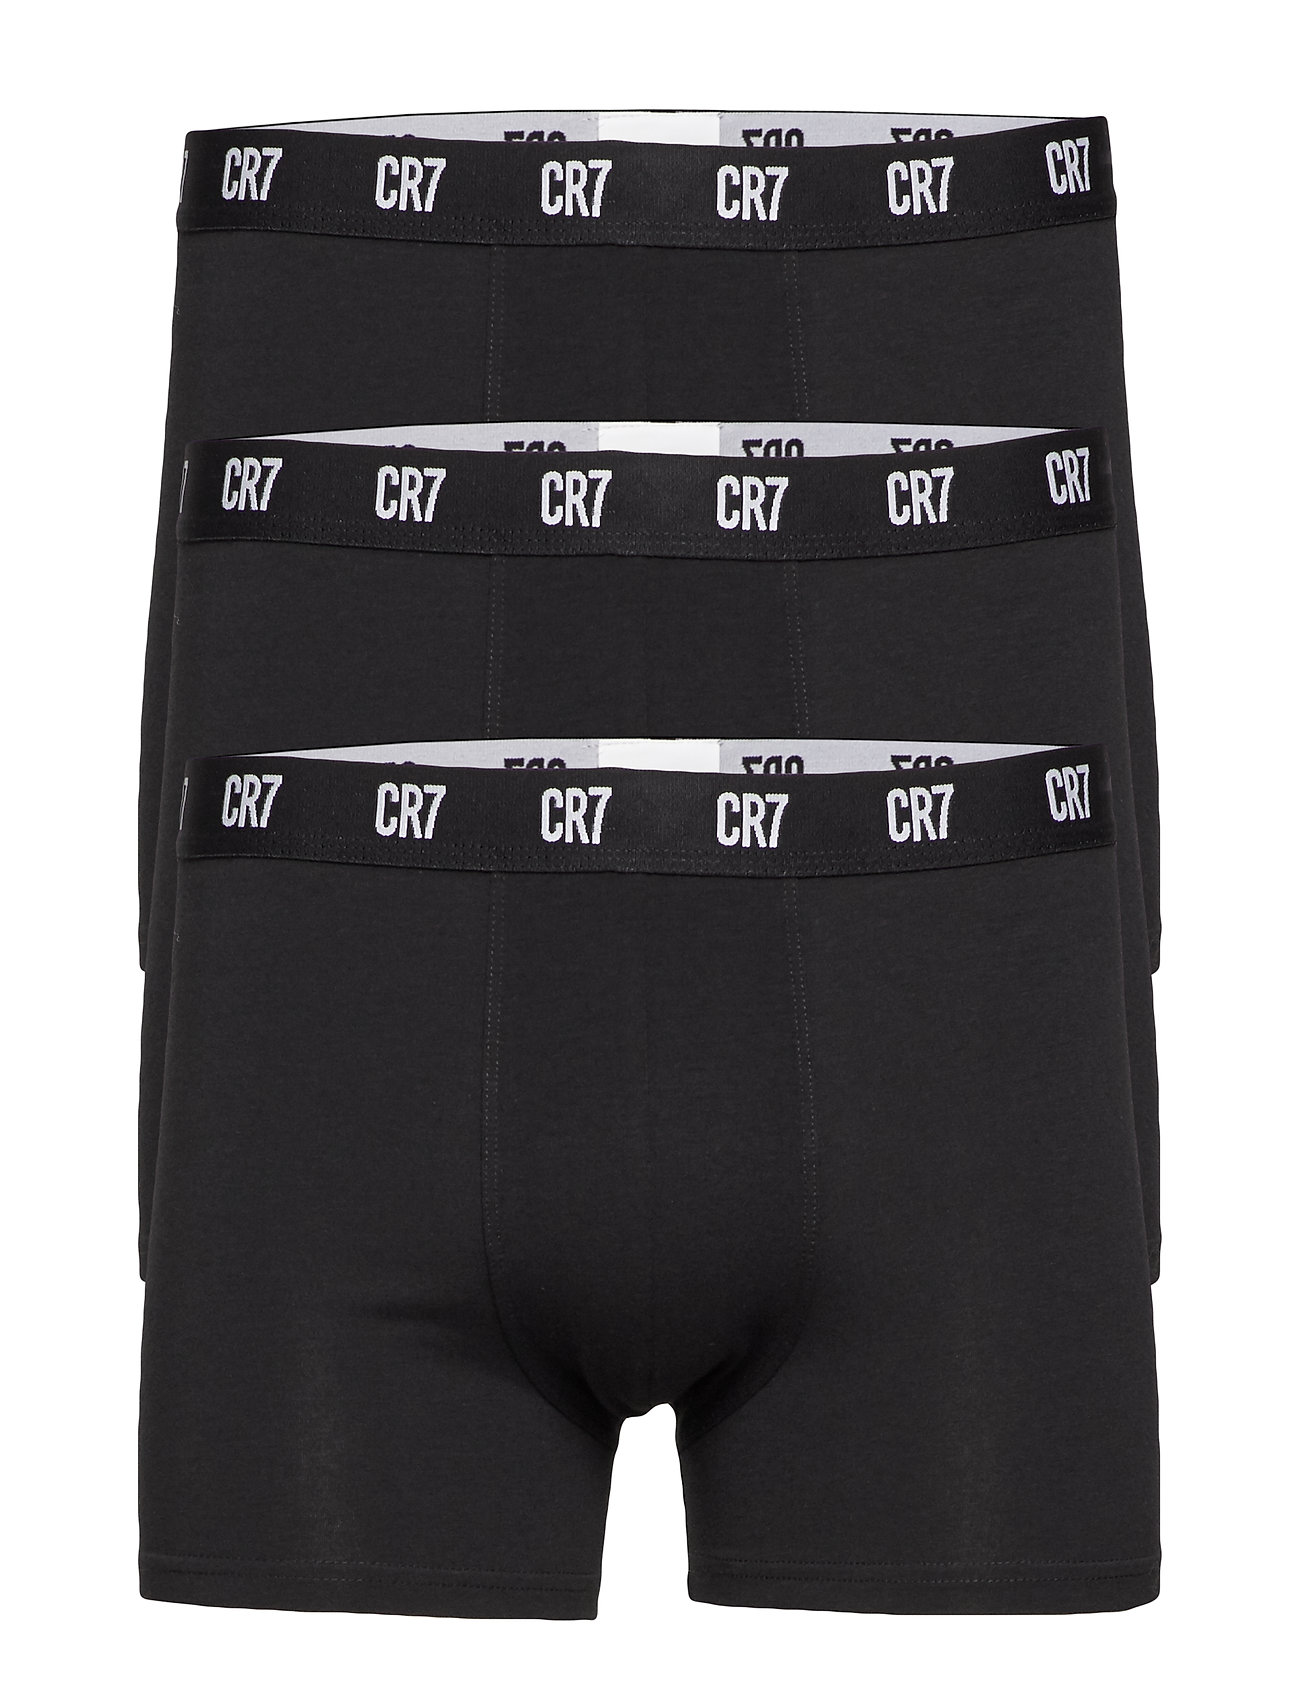 CR7 Cr7 Main Basic, Trunk, 3-pack - Boxers 